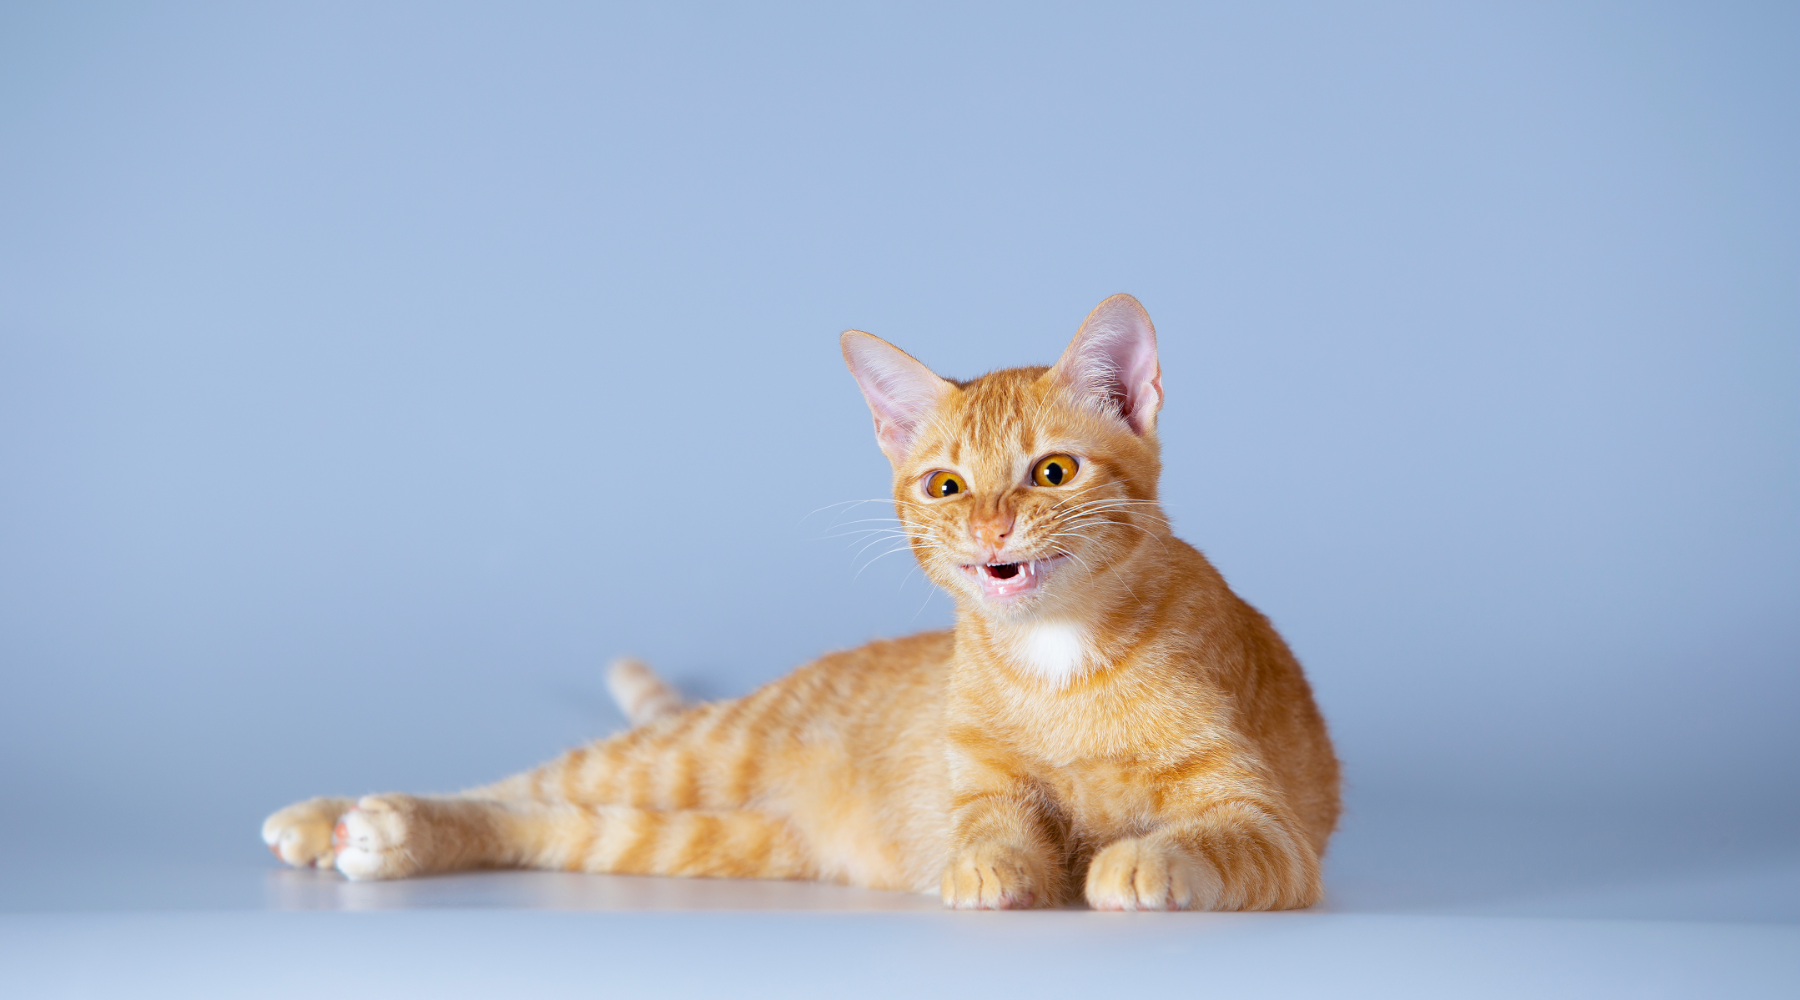 Ginger cat showing teeth